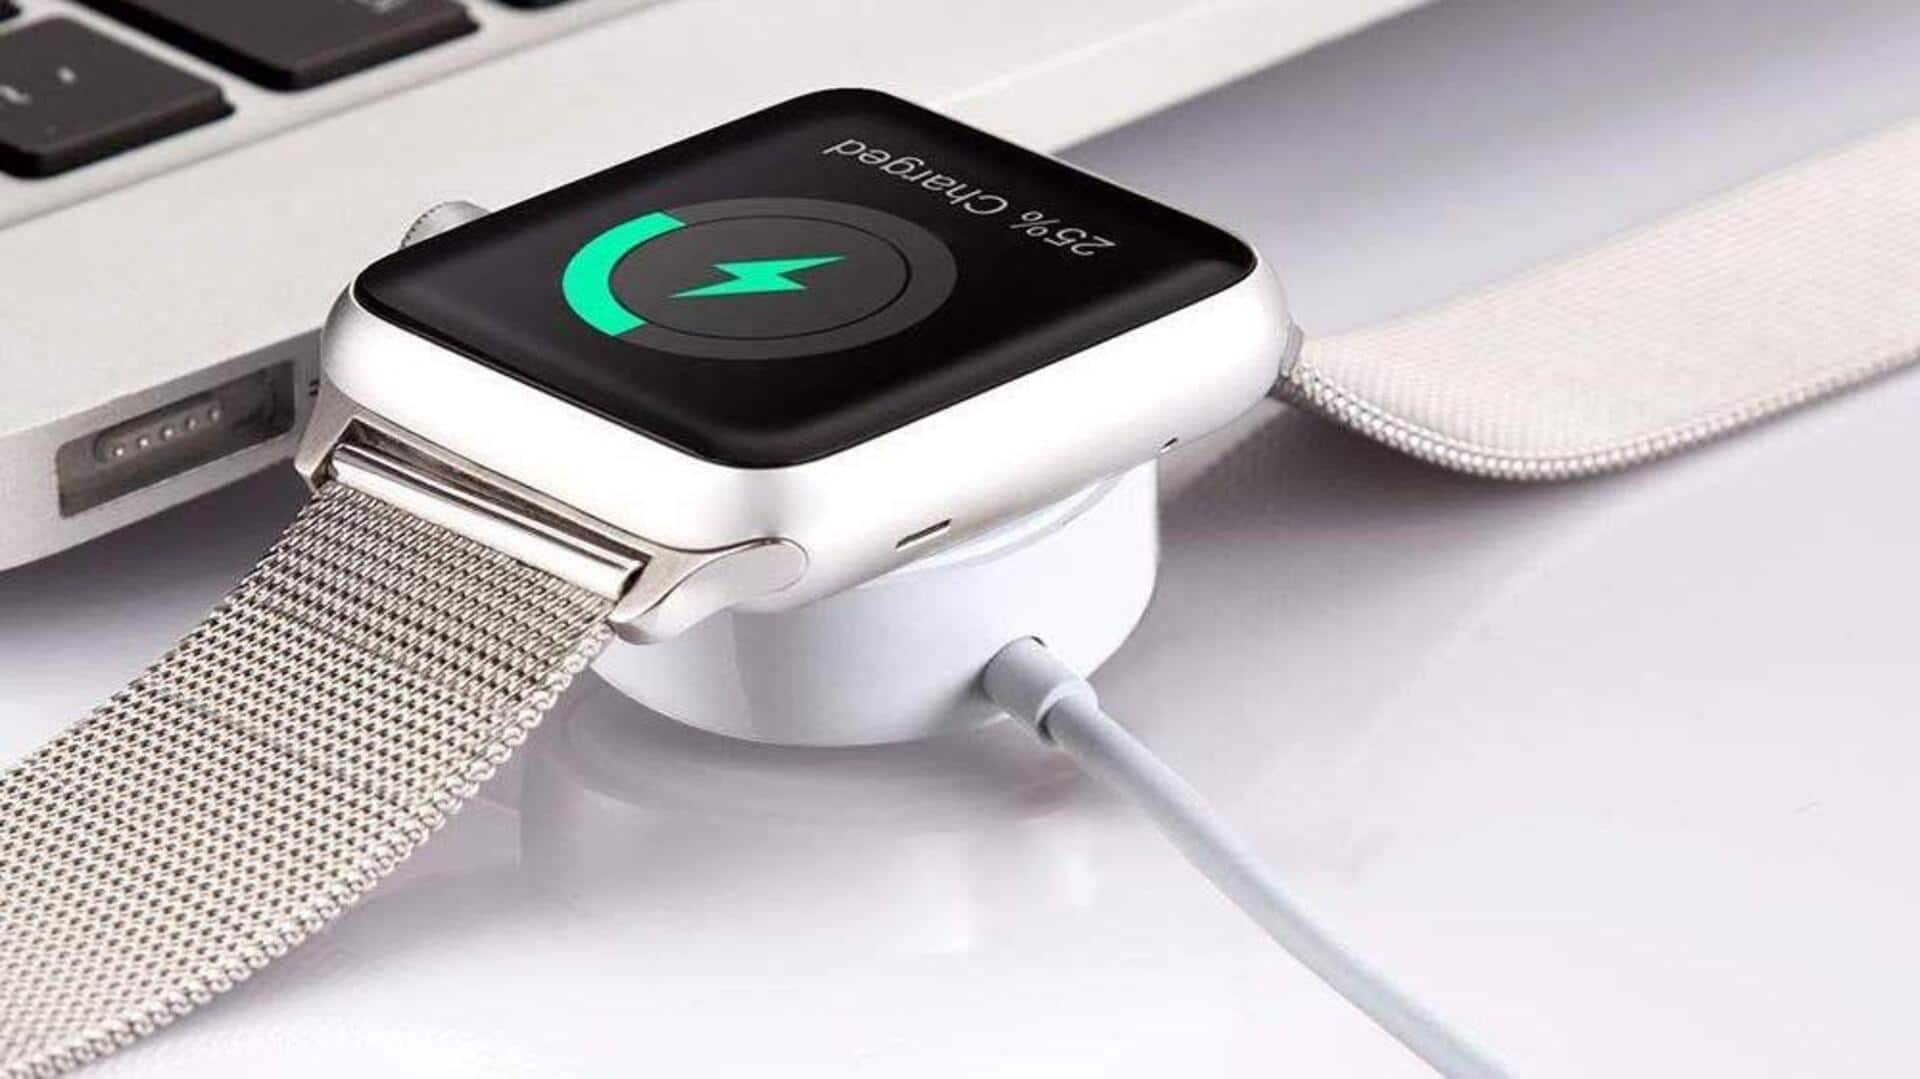 Why Apple Watch users should not use non-certified chargers